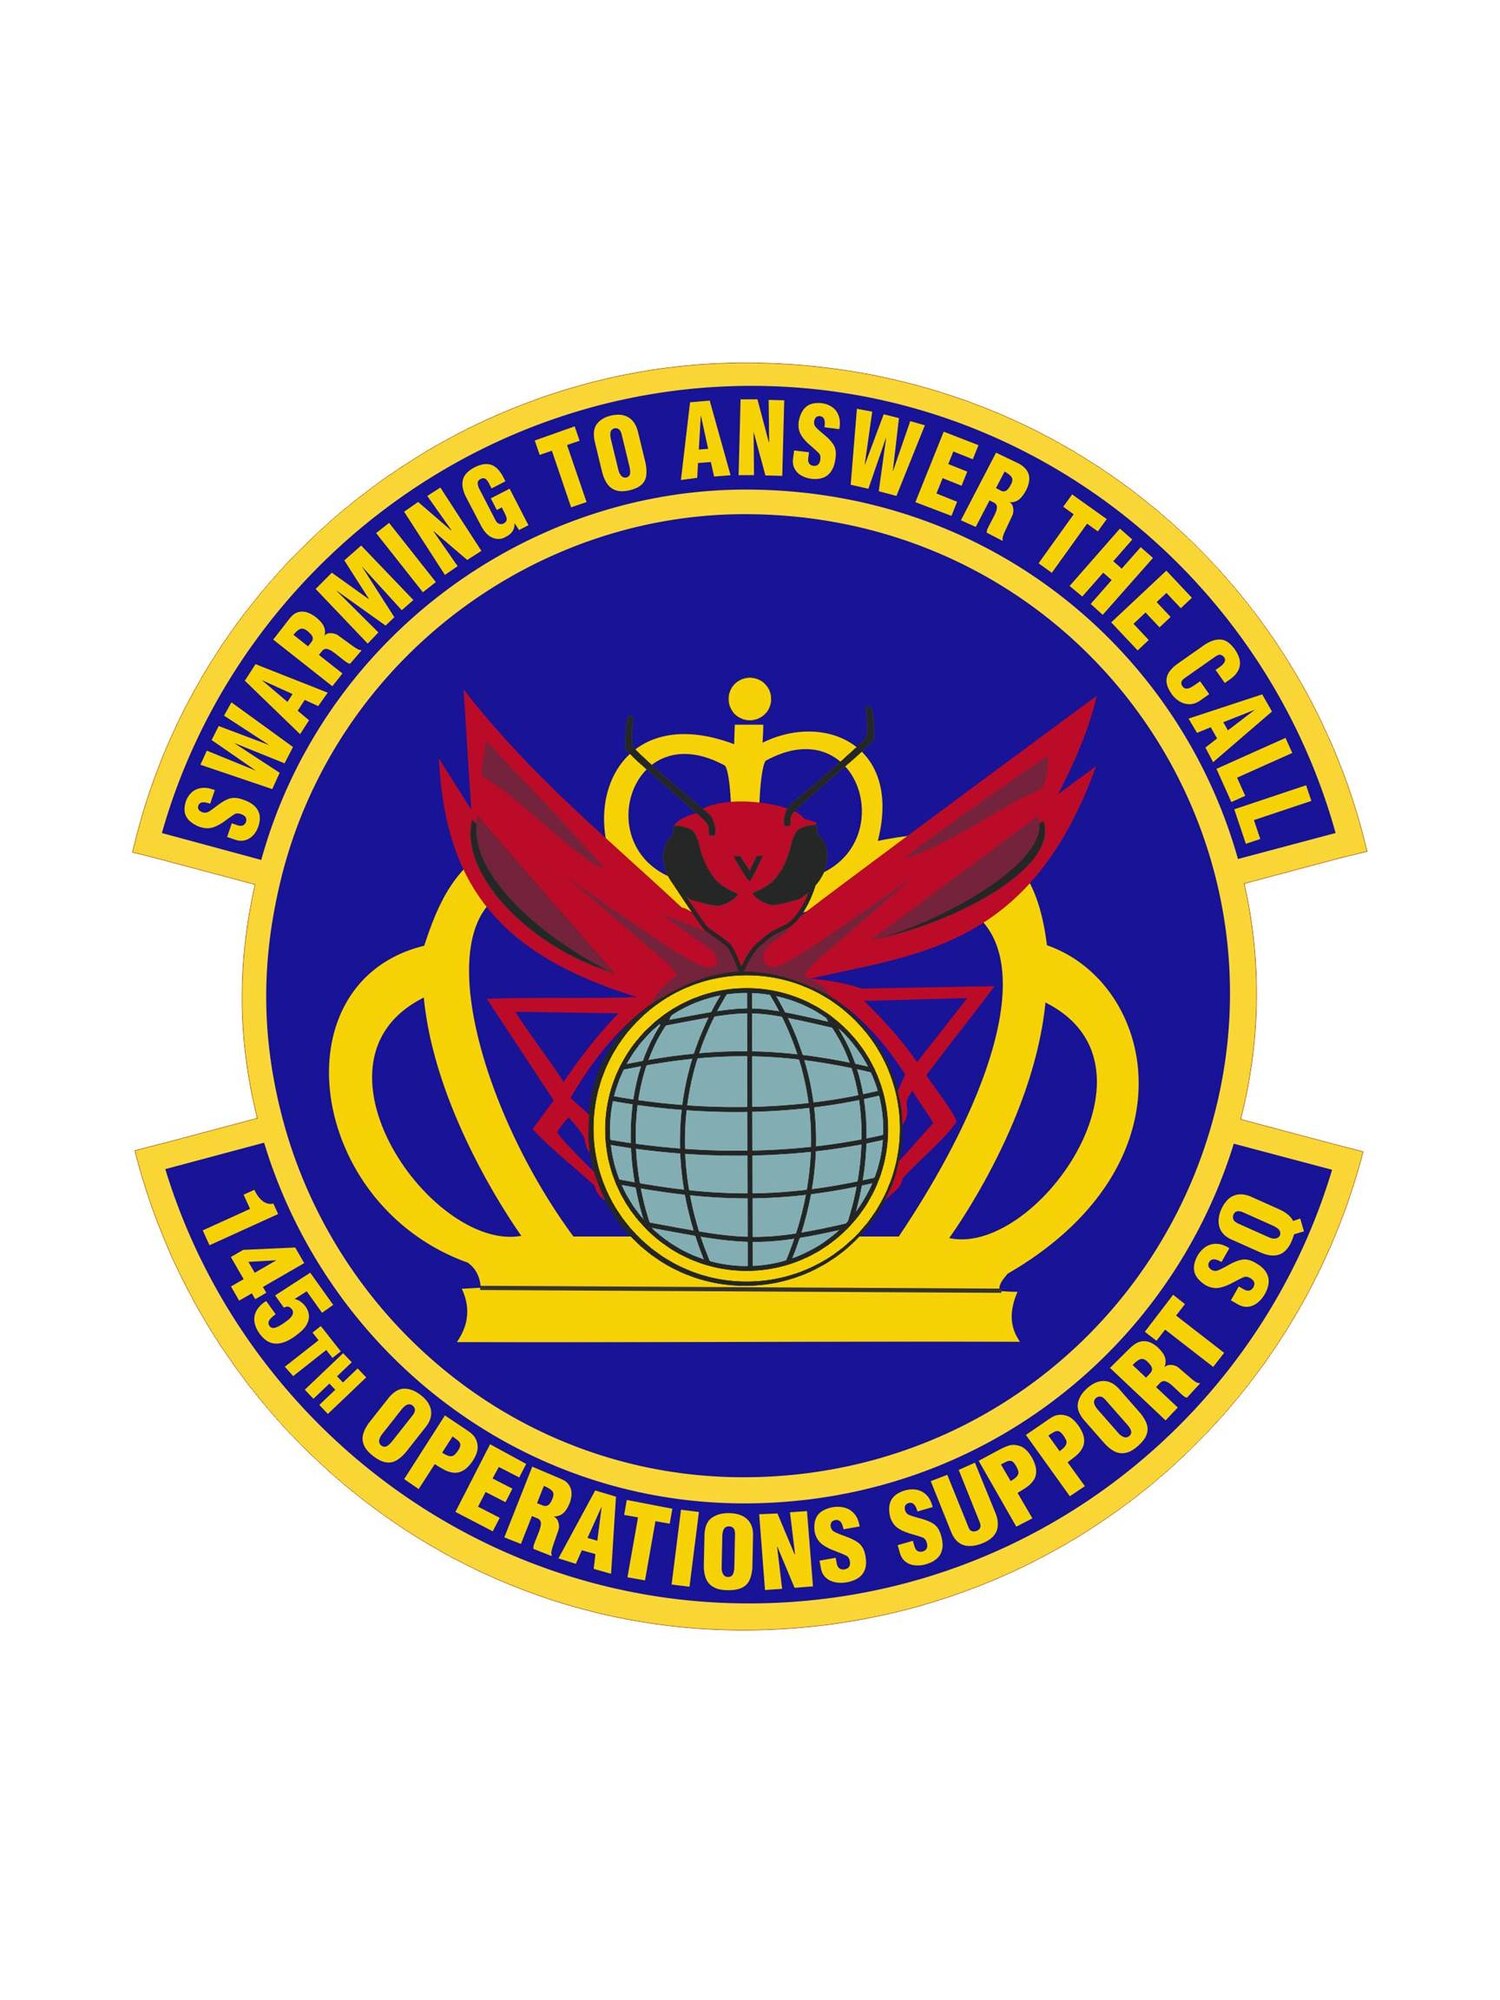 During a change of command ceremony held June 6, 2015, at the North Carolina Air National Guard Base, Charlotte Douglas International Airport, the new 145th Operations Support Squadron logo was unveiled.